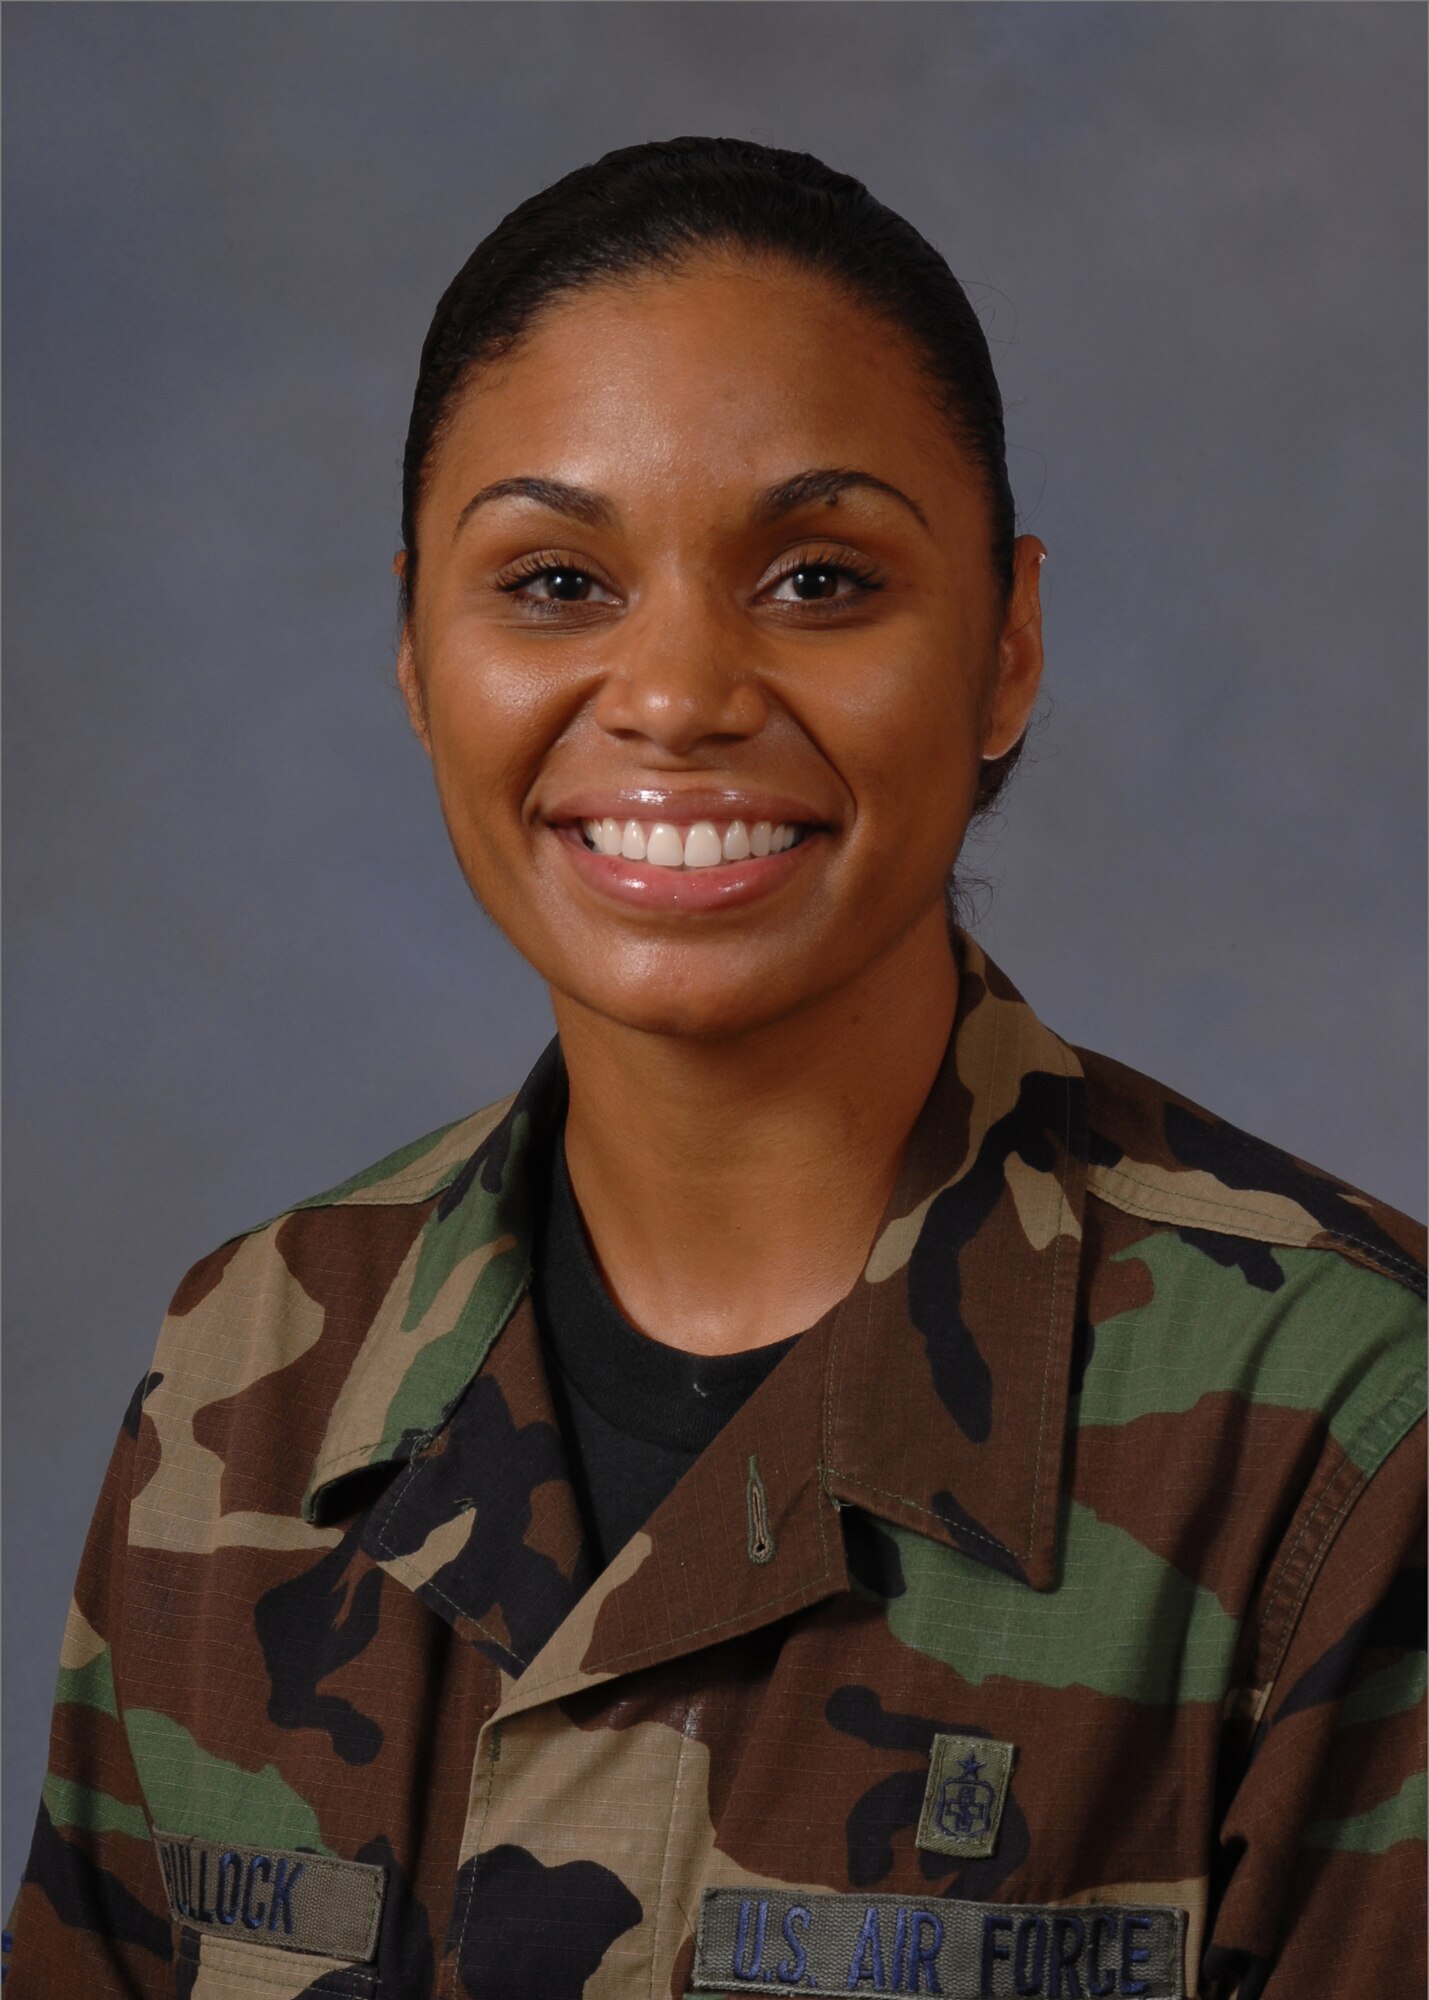 Tech. Sgt. Naomi Bullock, Public Health technician at Arnold’s Medical Aid Station, has won the AFMC-level Public Health Non-Commissioned Officer of the Year award. (Photo provided)